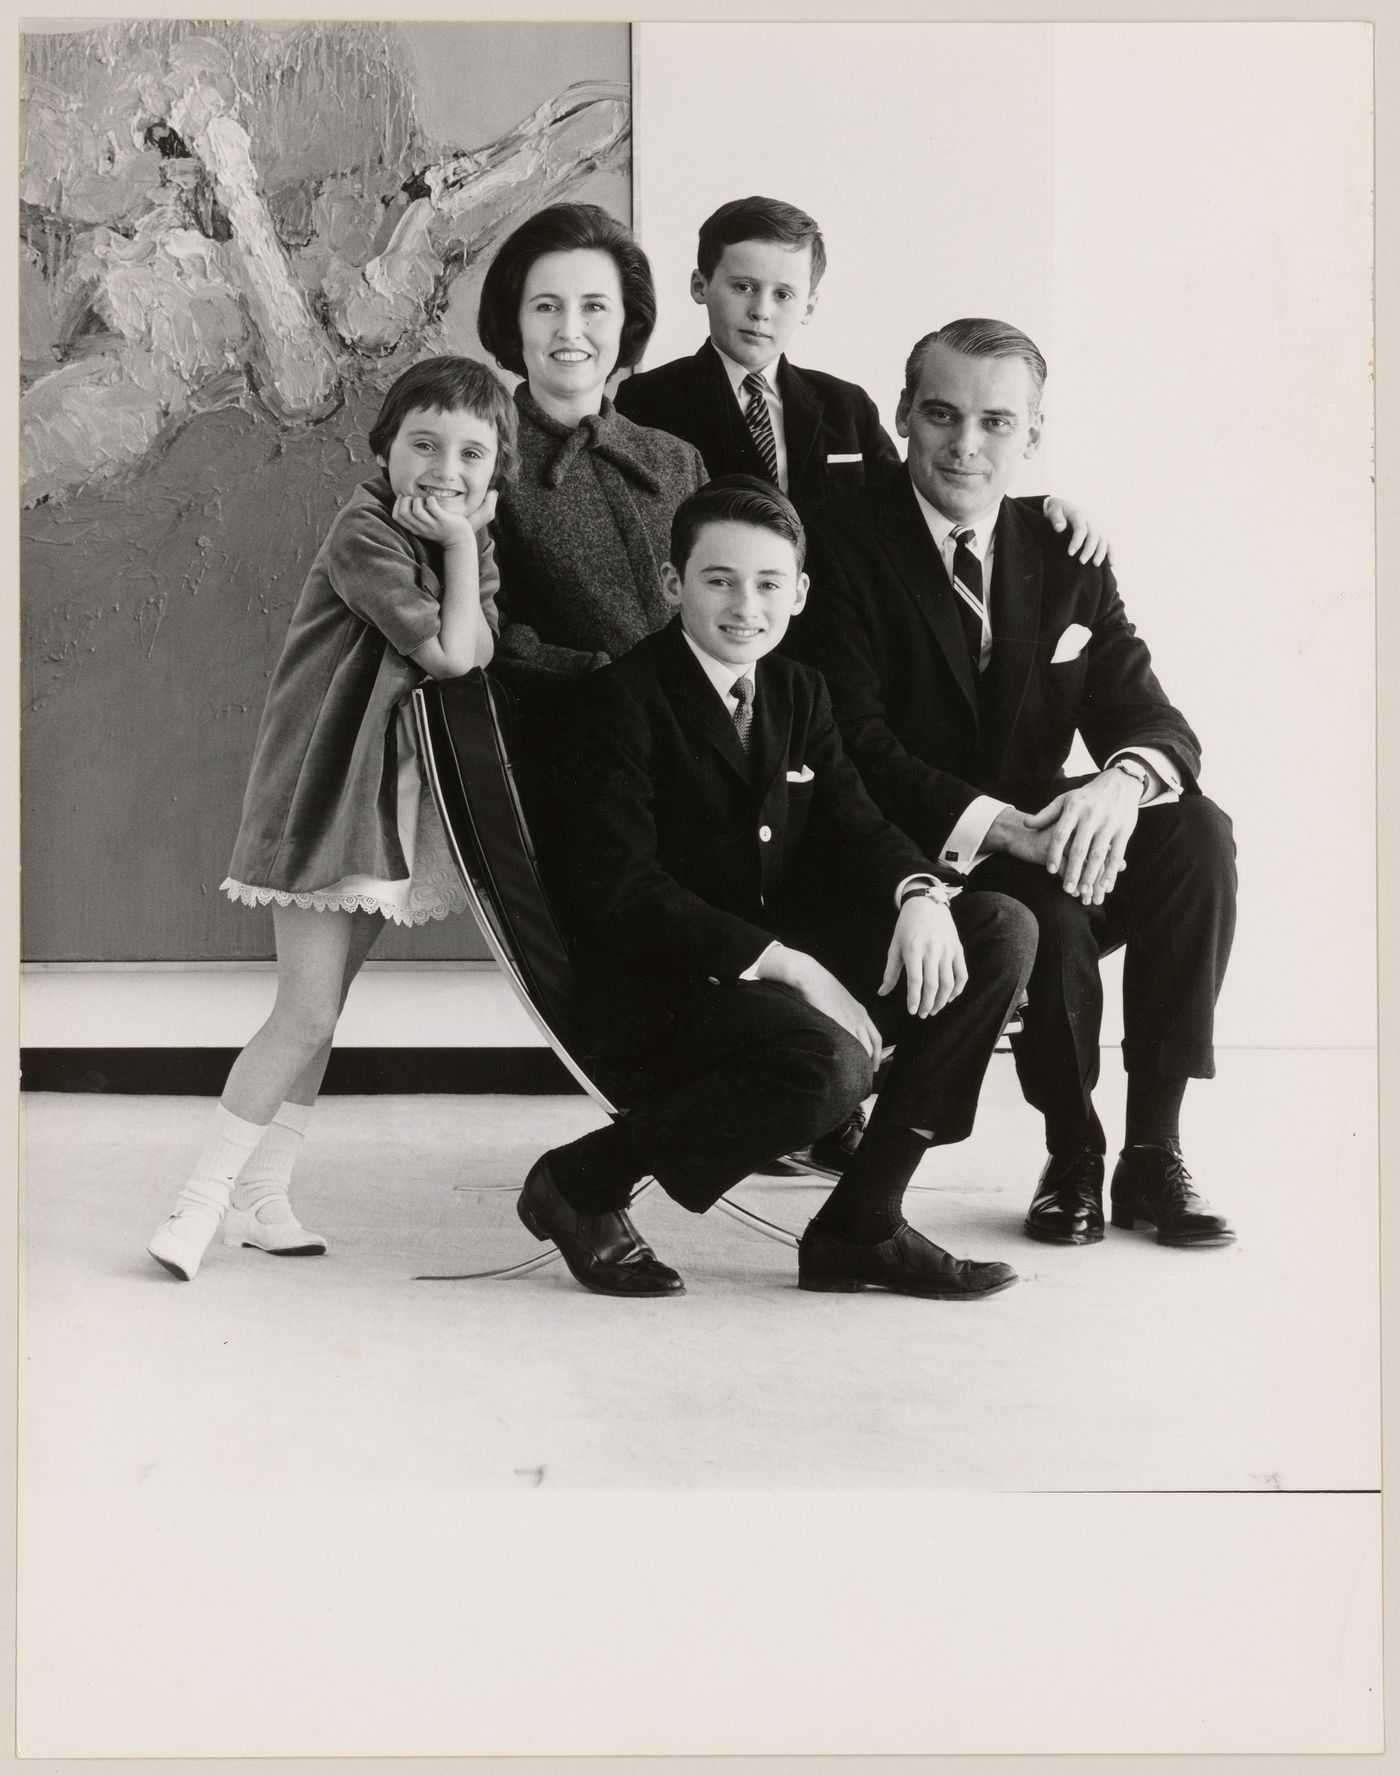 Family portrait of Parkin, his wife Jeanne Wormith, and their children Jennifer, John, and Geoffrey